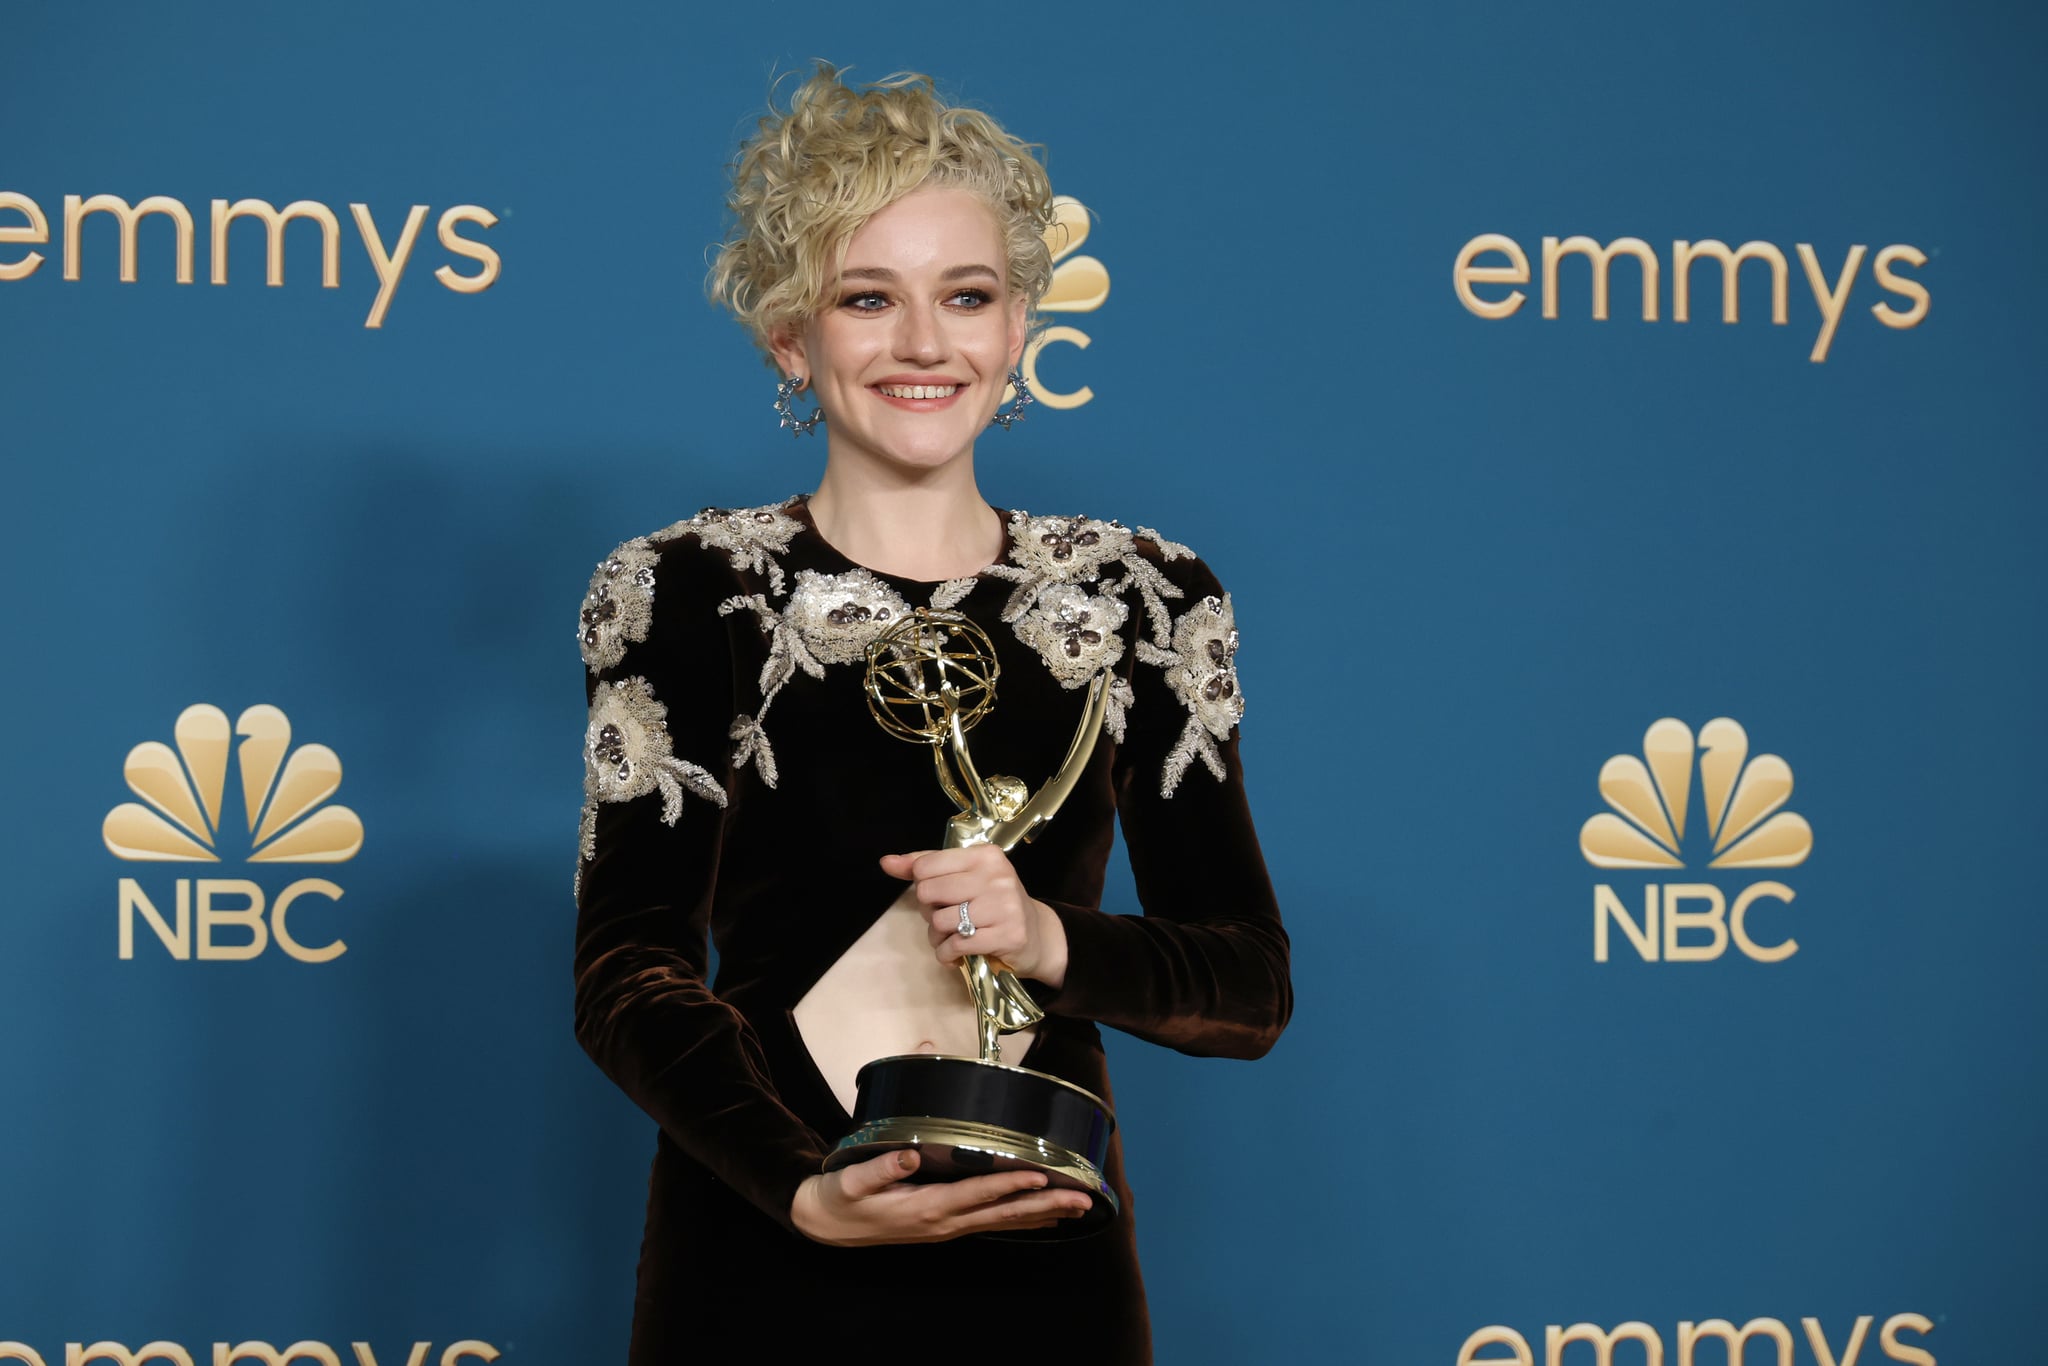 LOS ANGELES, CALIFORNIA - SEPTEMBER 12: Julia Garner, winner of the Outstanding Supporting Actress in a Drama Series award for 'Ozark,' poses in the press room during the 74th Primetime Emmys at Microsoft Theatre on September 12, 2022 in Los Angeles, California. (Photo by Frazer Harrison/Getty Images)